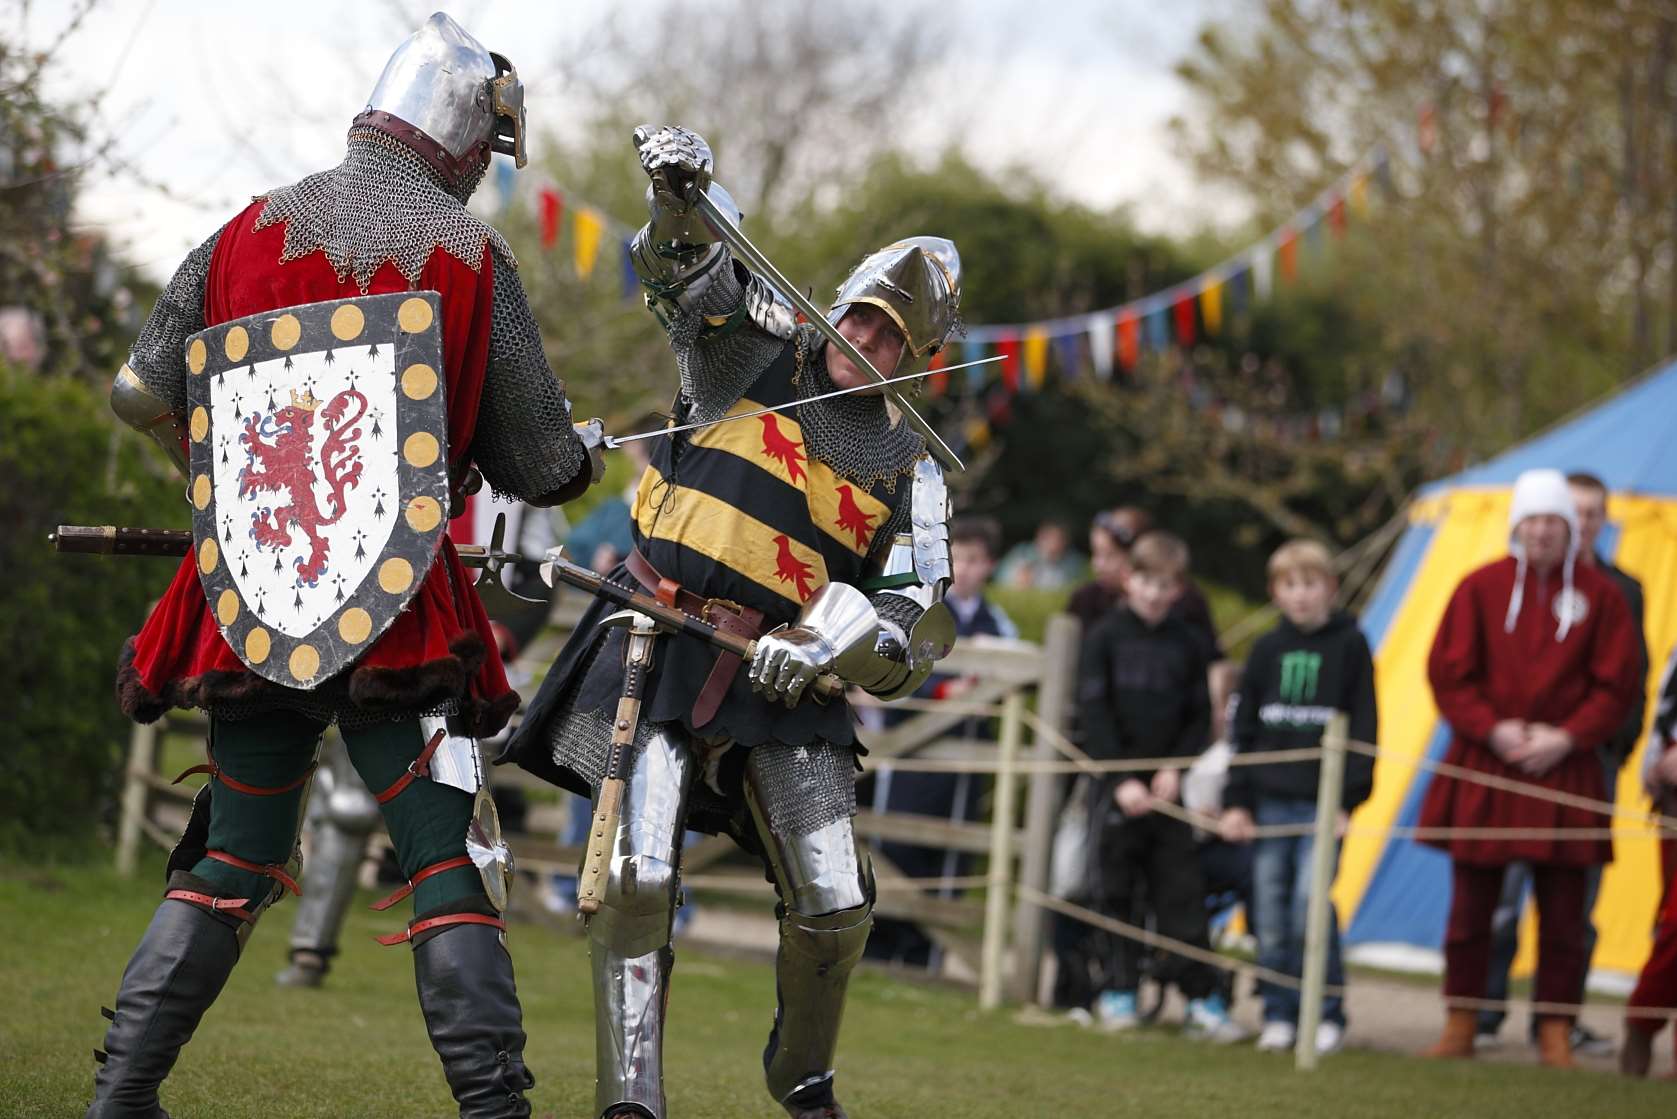 Knights doing battle at the English Festival